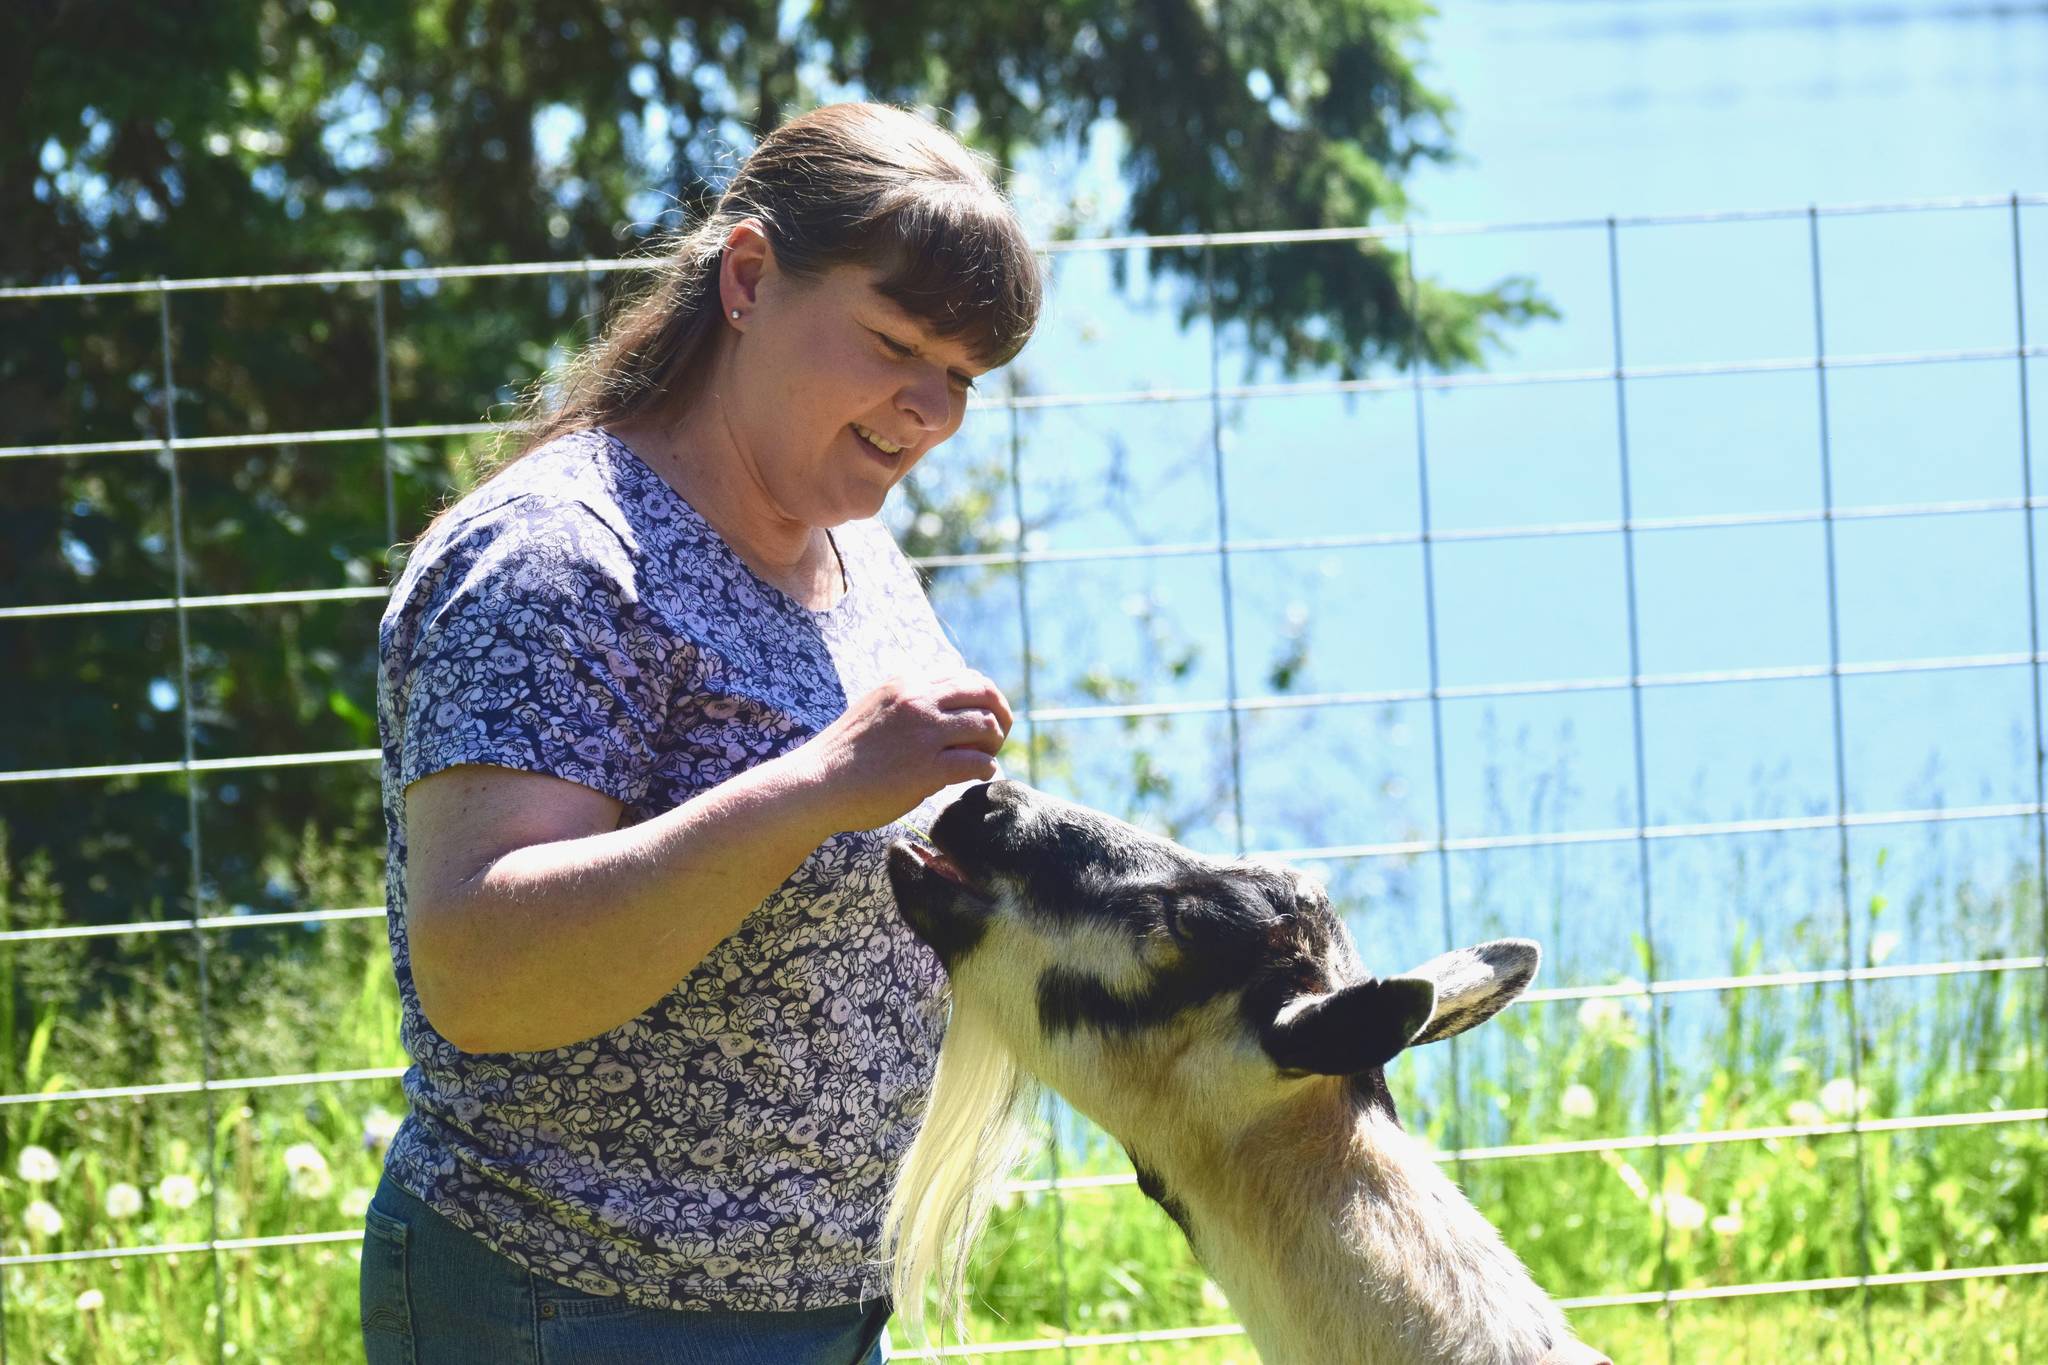 Deanna O’Connor plays with Chloe, an alpine goat, at her home in Nikiski, Alaska on Tuesday, July 3, 2018. O’Connor milks her 11 goats twice a day, and uses the milk to make homemade ice cream, cheese and soap. (Photo by Victoria Petersen/Peninsula Clarion)